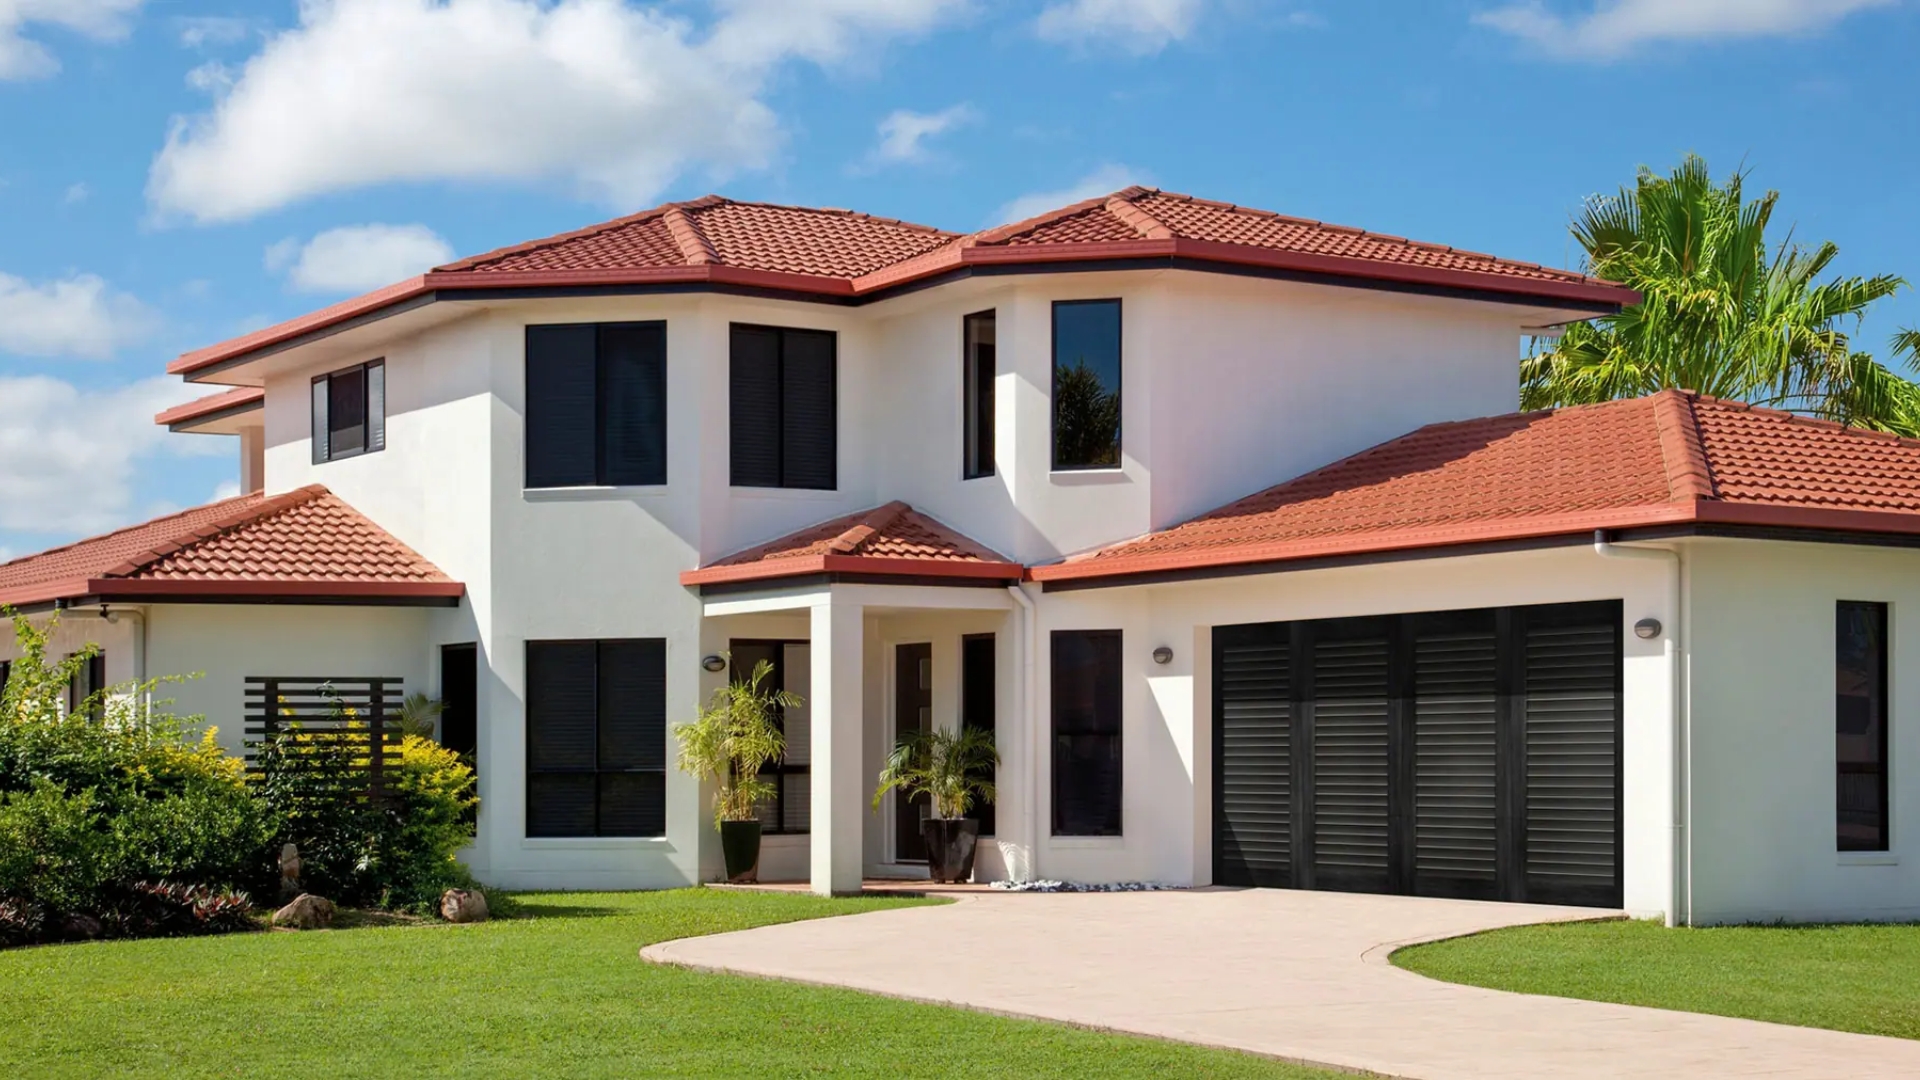 A home with a hurricane-rated garage door installed